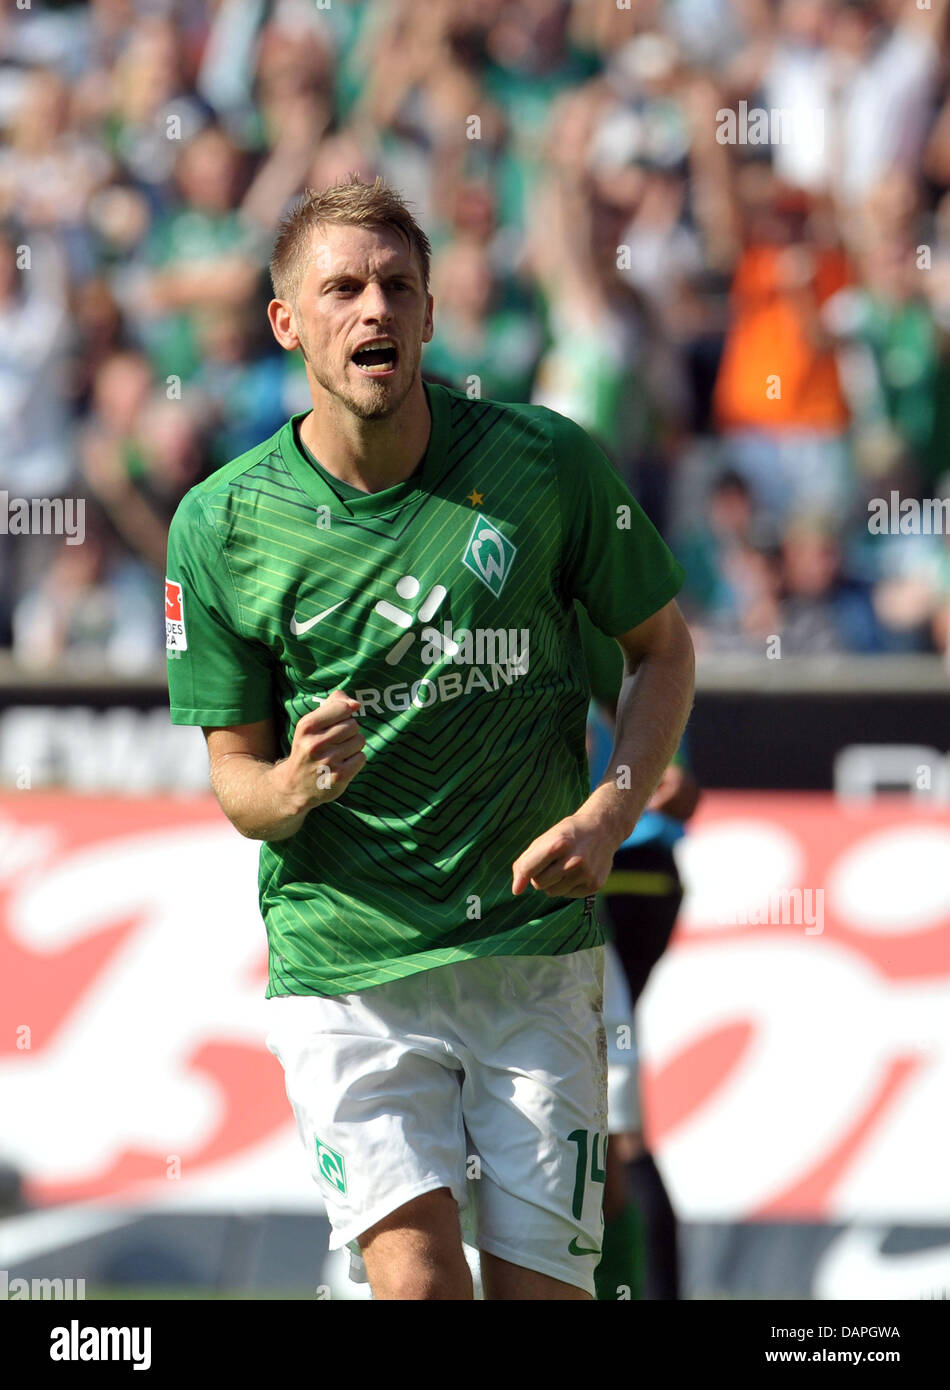 Bremen's Aaron Hunt (R) cheers after scoring in the penalty kick the 4-3  goal during the Bundesliga soccer match between Werder Bremen and SC  Freiburg at the Weser Stadion in Bremen, Germany,